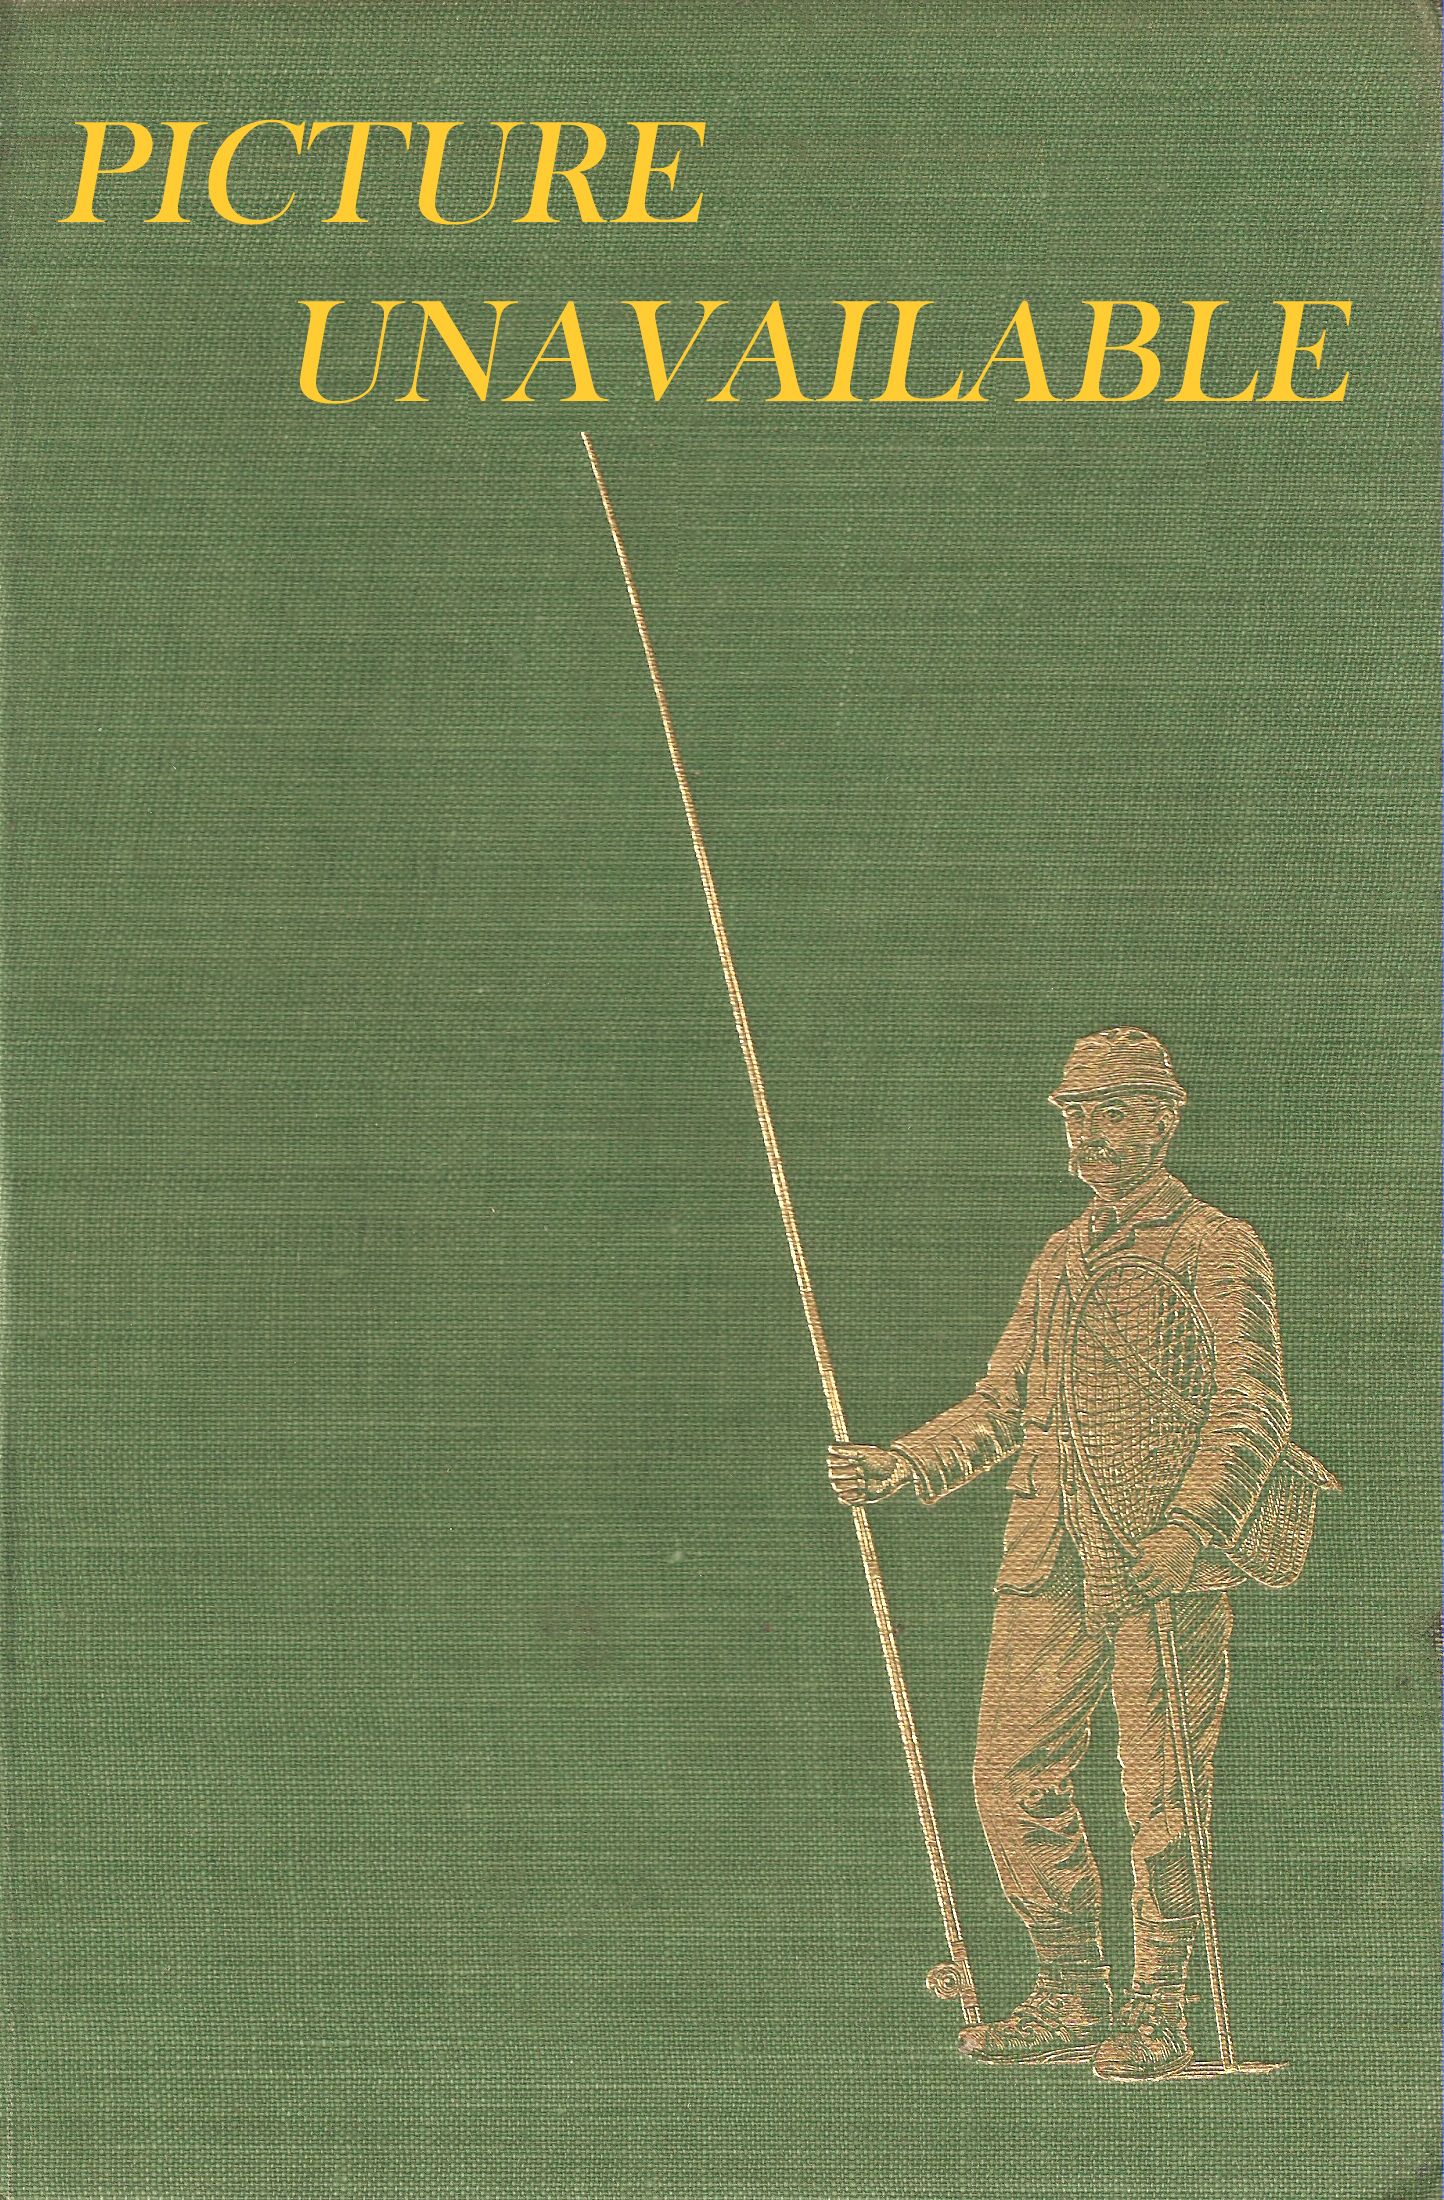 THE A.B.C. OF FLY-FISHING (POOR MAN'S FLY-FISHING.) With diagrams. By Len Chaloner.